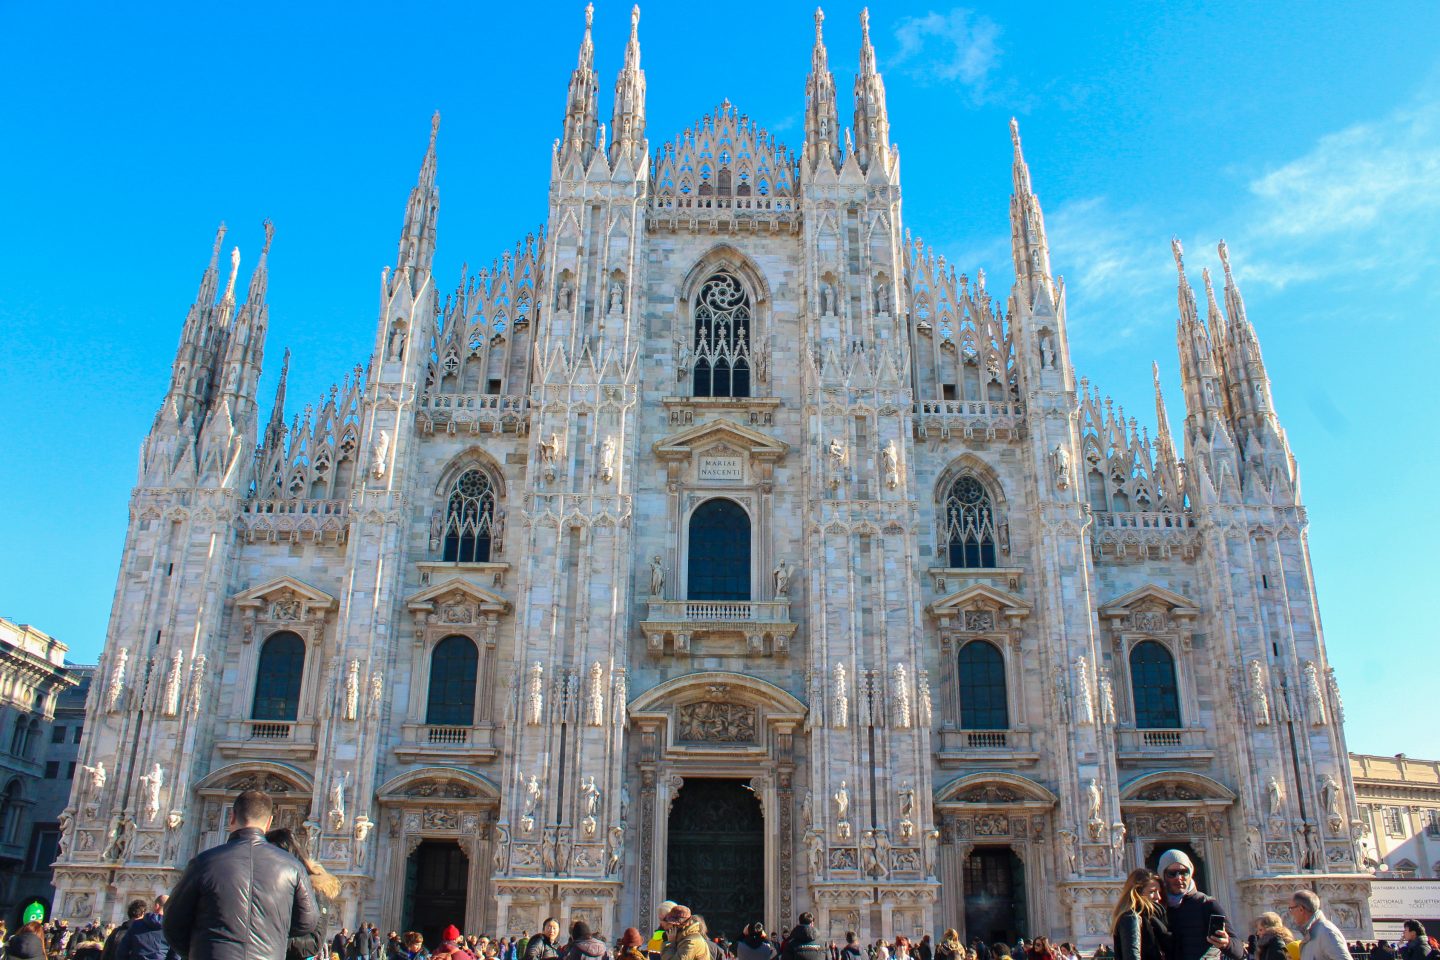 One day trip to Milan. Couple adventure.